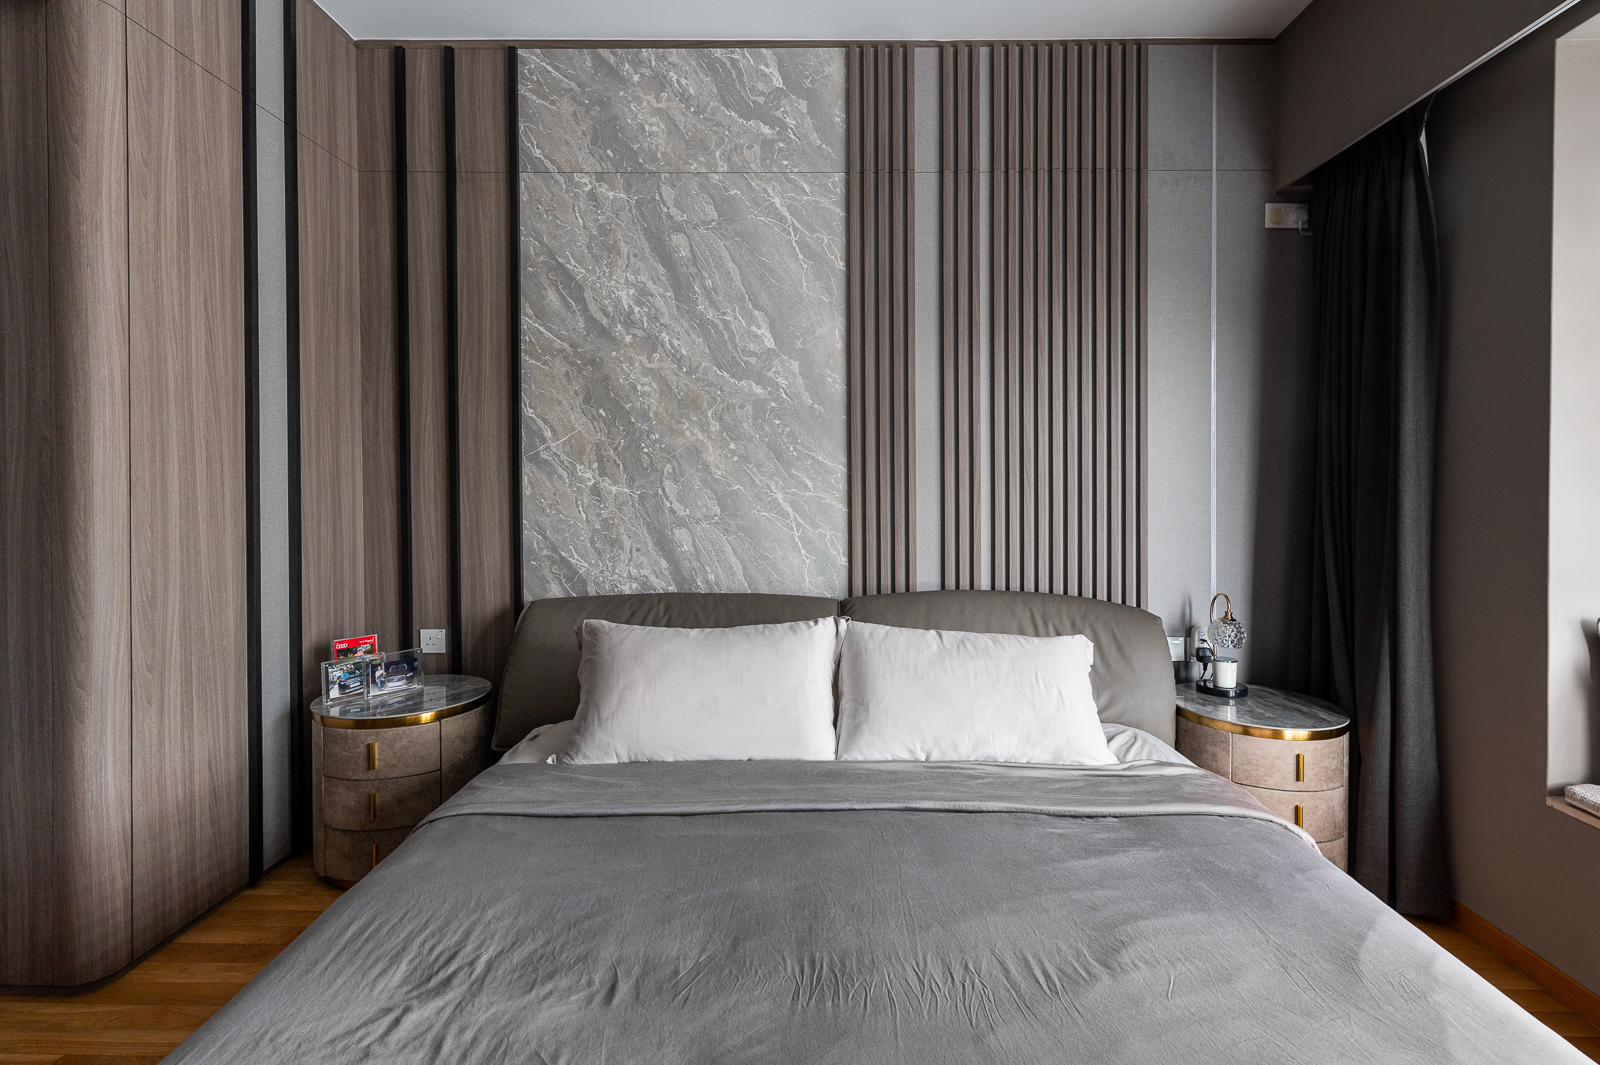 Formica Singapore Bedroom with Wood Grain and Metallic Stone